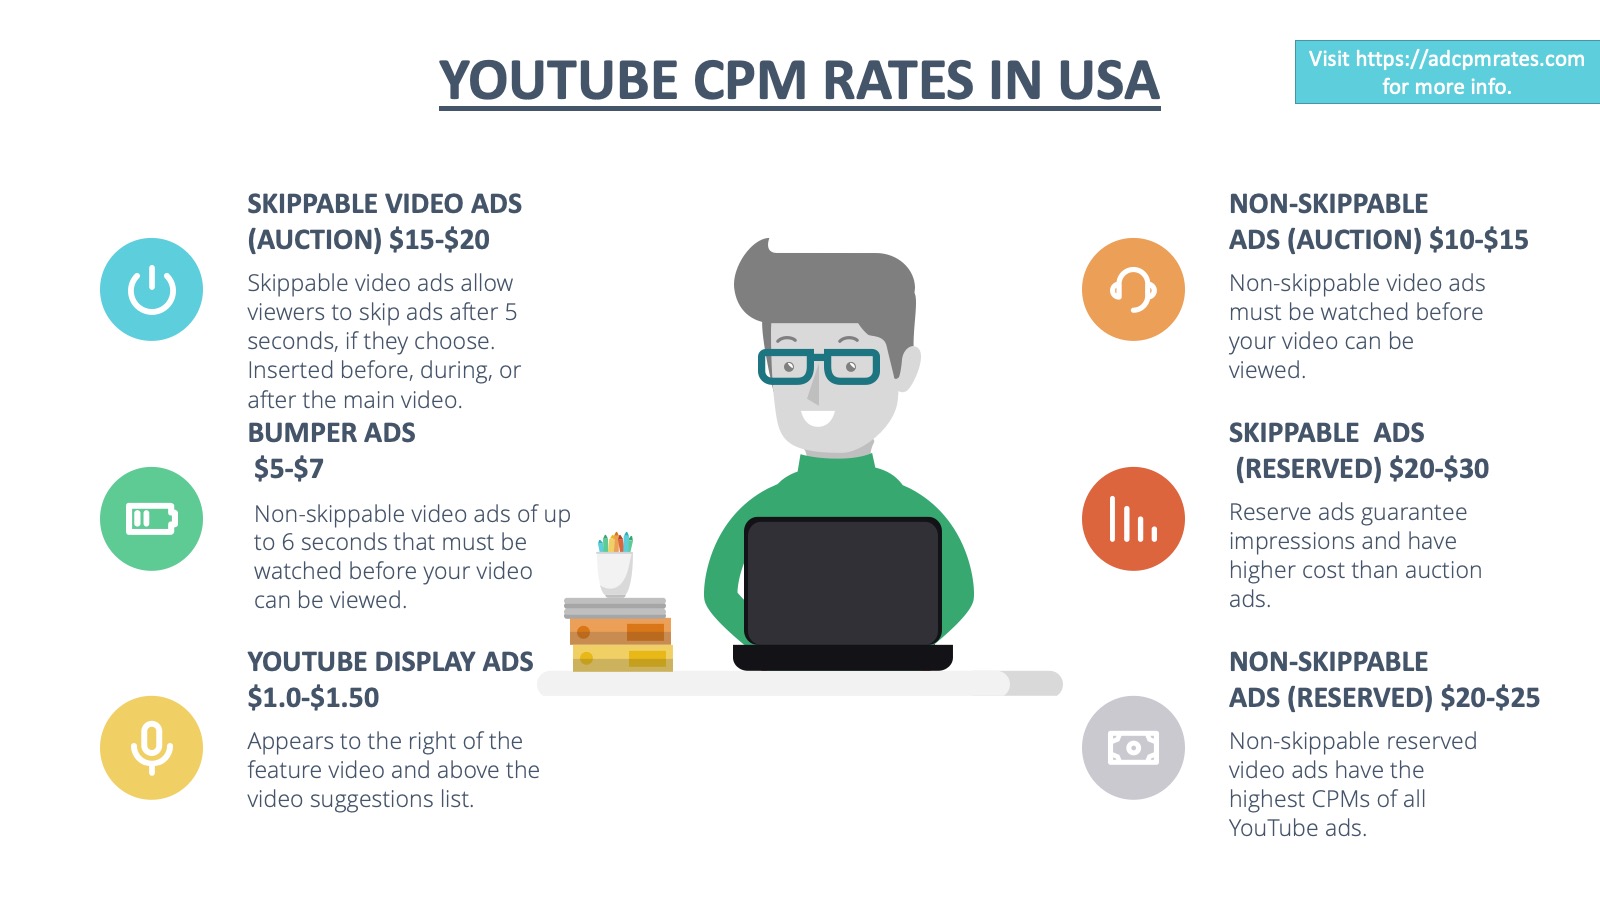 What is the average CPM in  video ads in the USA nowadays